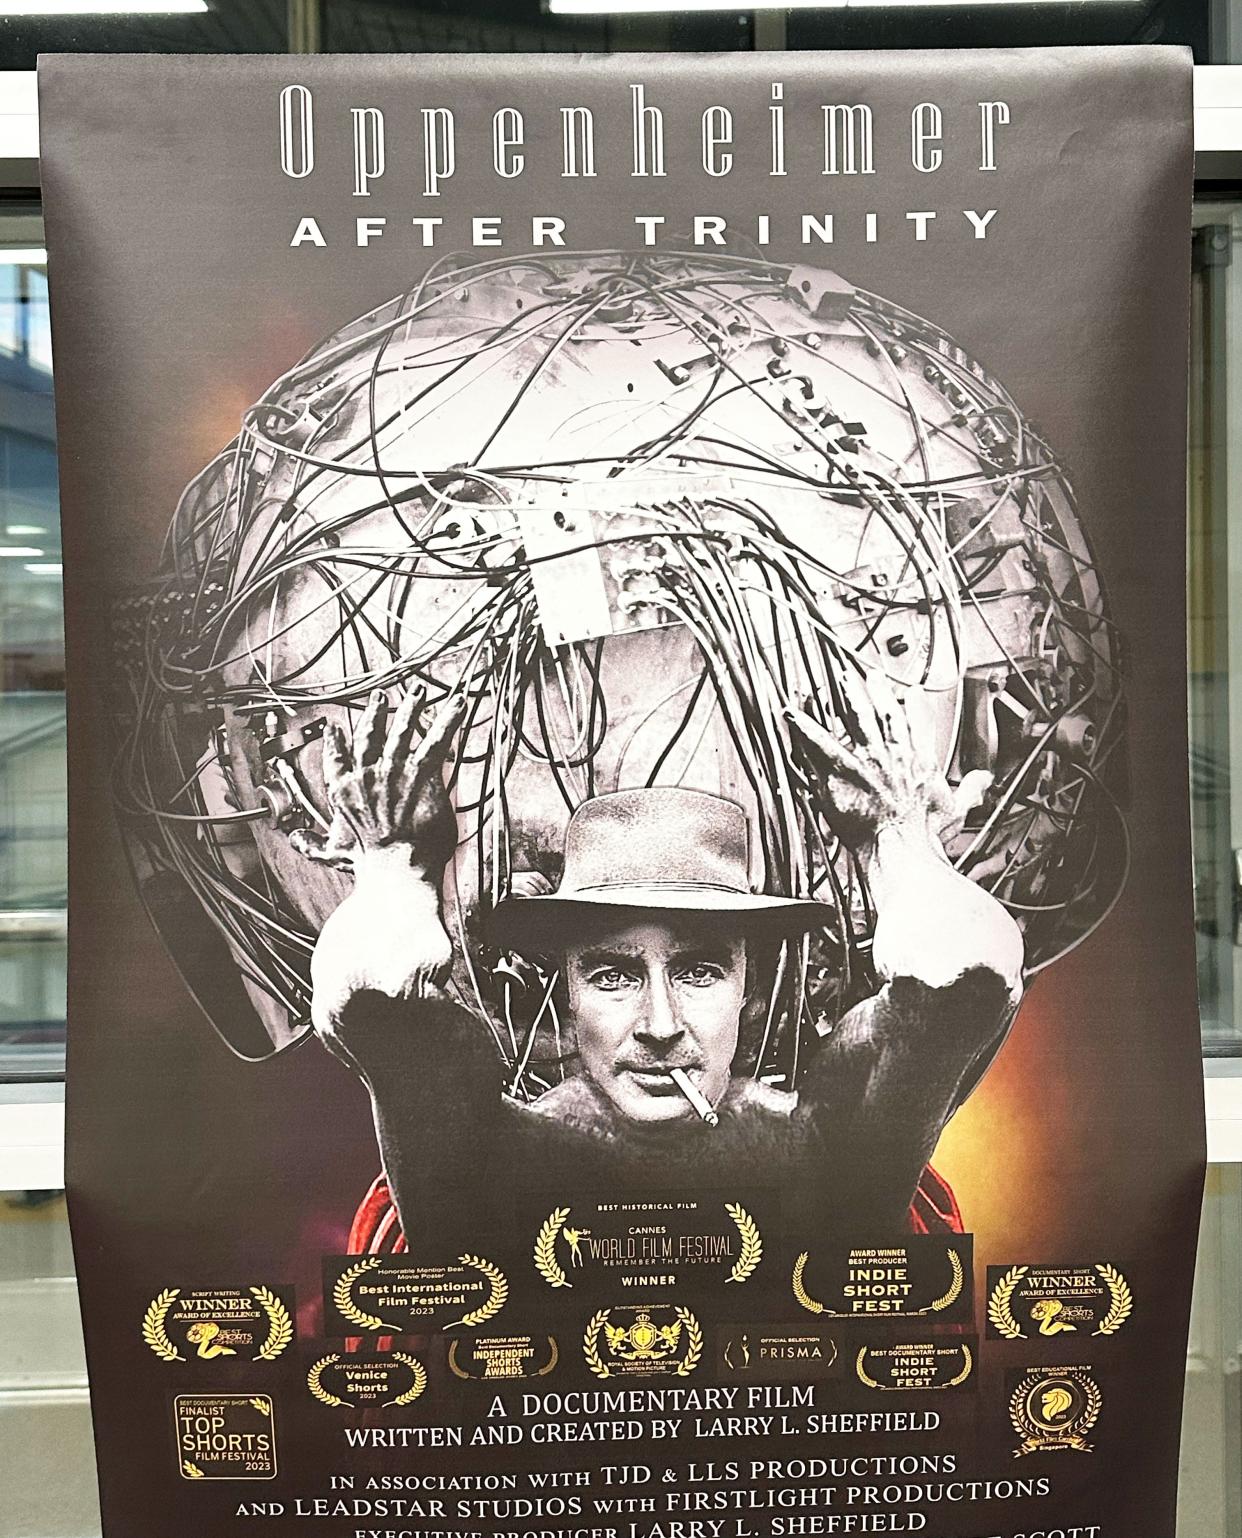 The documentary film poster for "Oppenheimer: After Trinity."